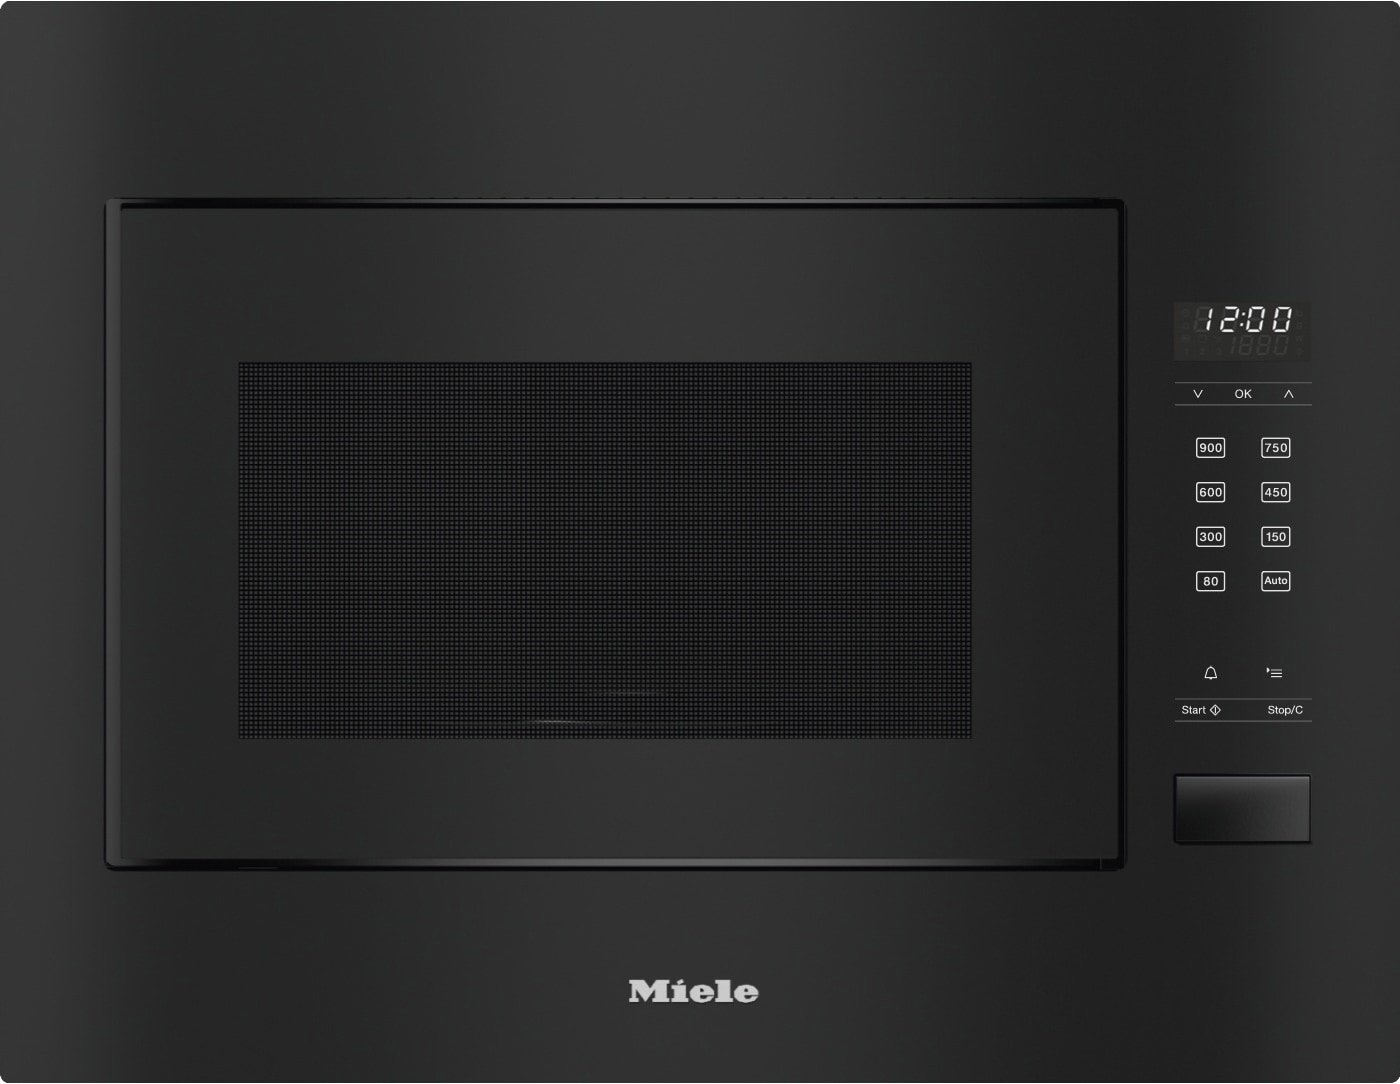 #1 - Miele mikroovn  M2240OBSW integreret